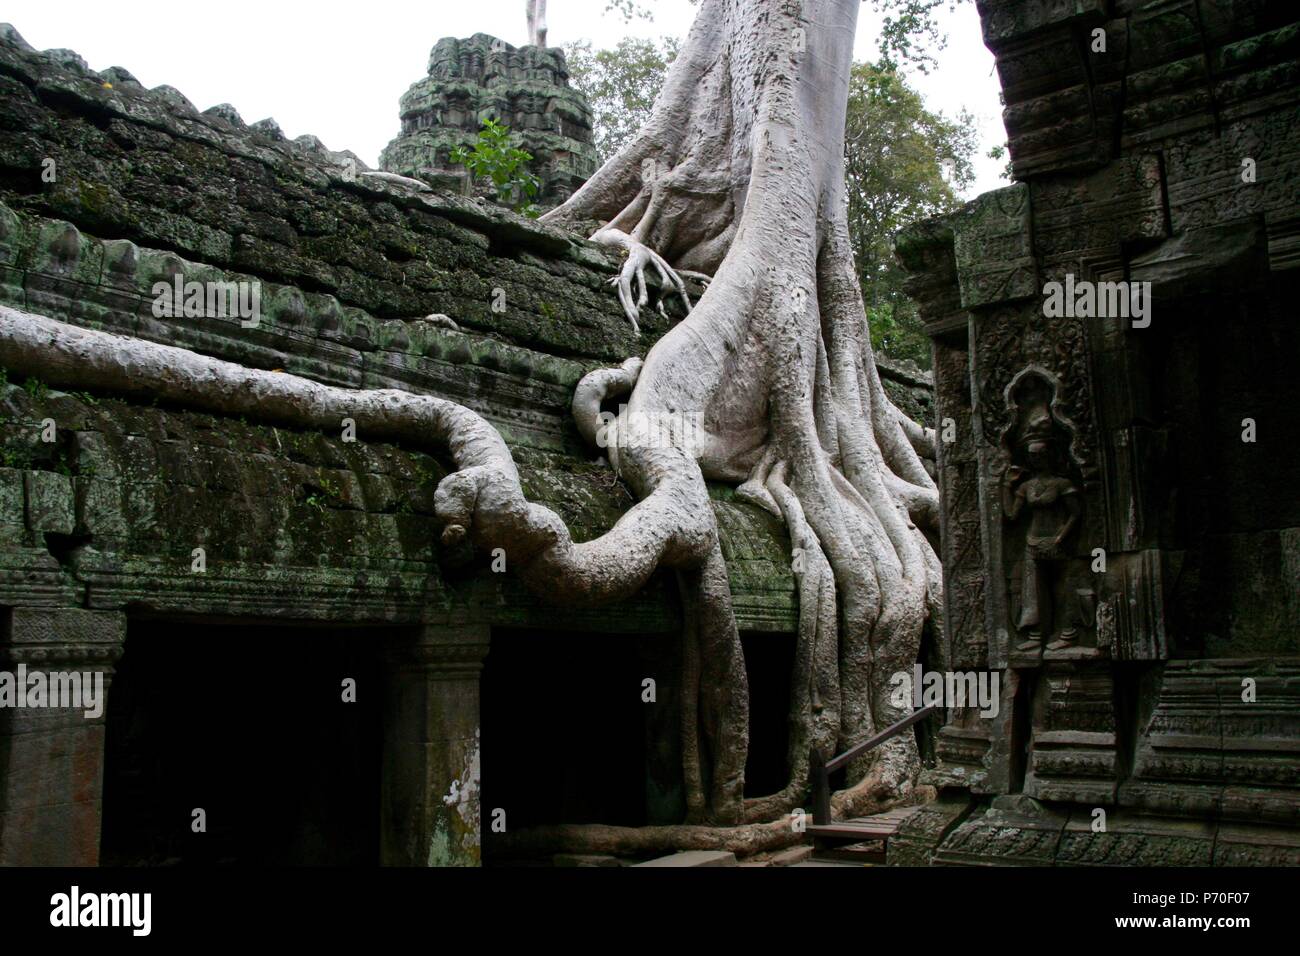 Tomb raider temple in Siem Reap Province of Cambodia Stock Photo